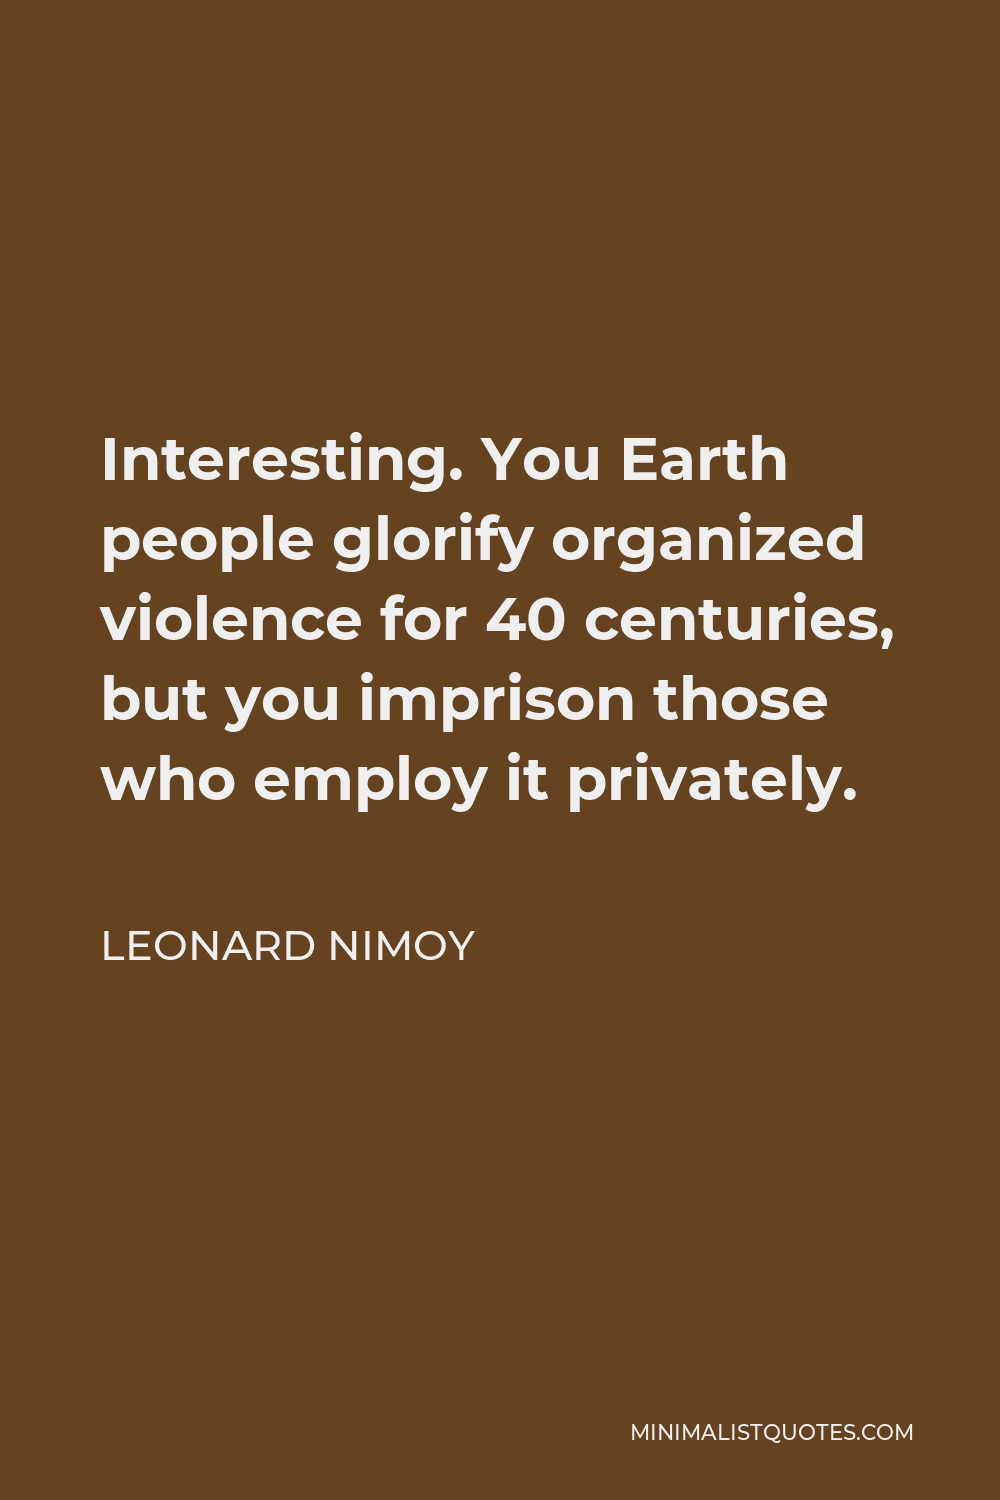 Leonard Nimoy Quote - Interesting. You Earth people glorify organized violence for 40 centuries, but you imprison those who employ it privately.